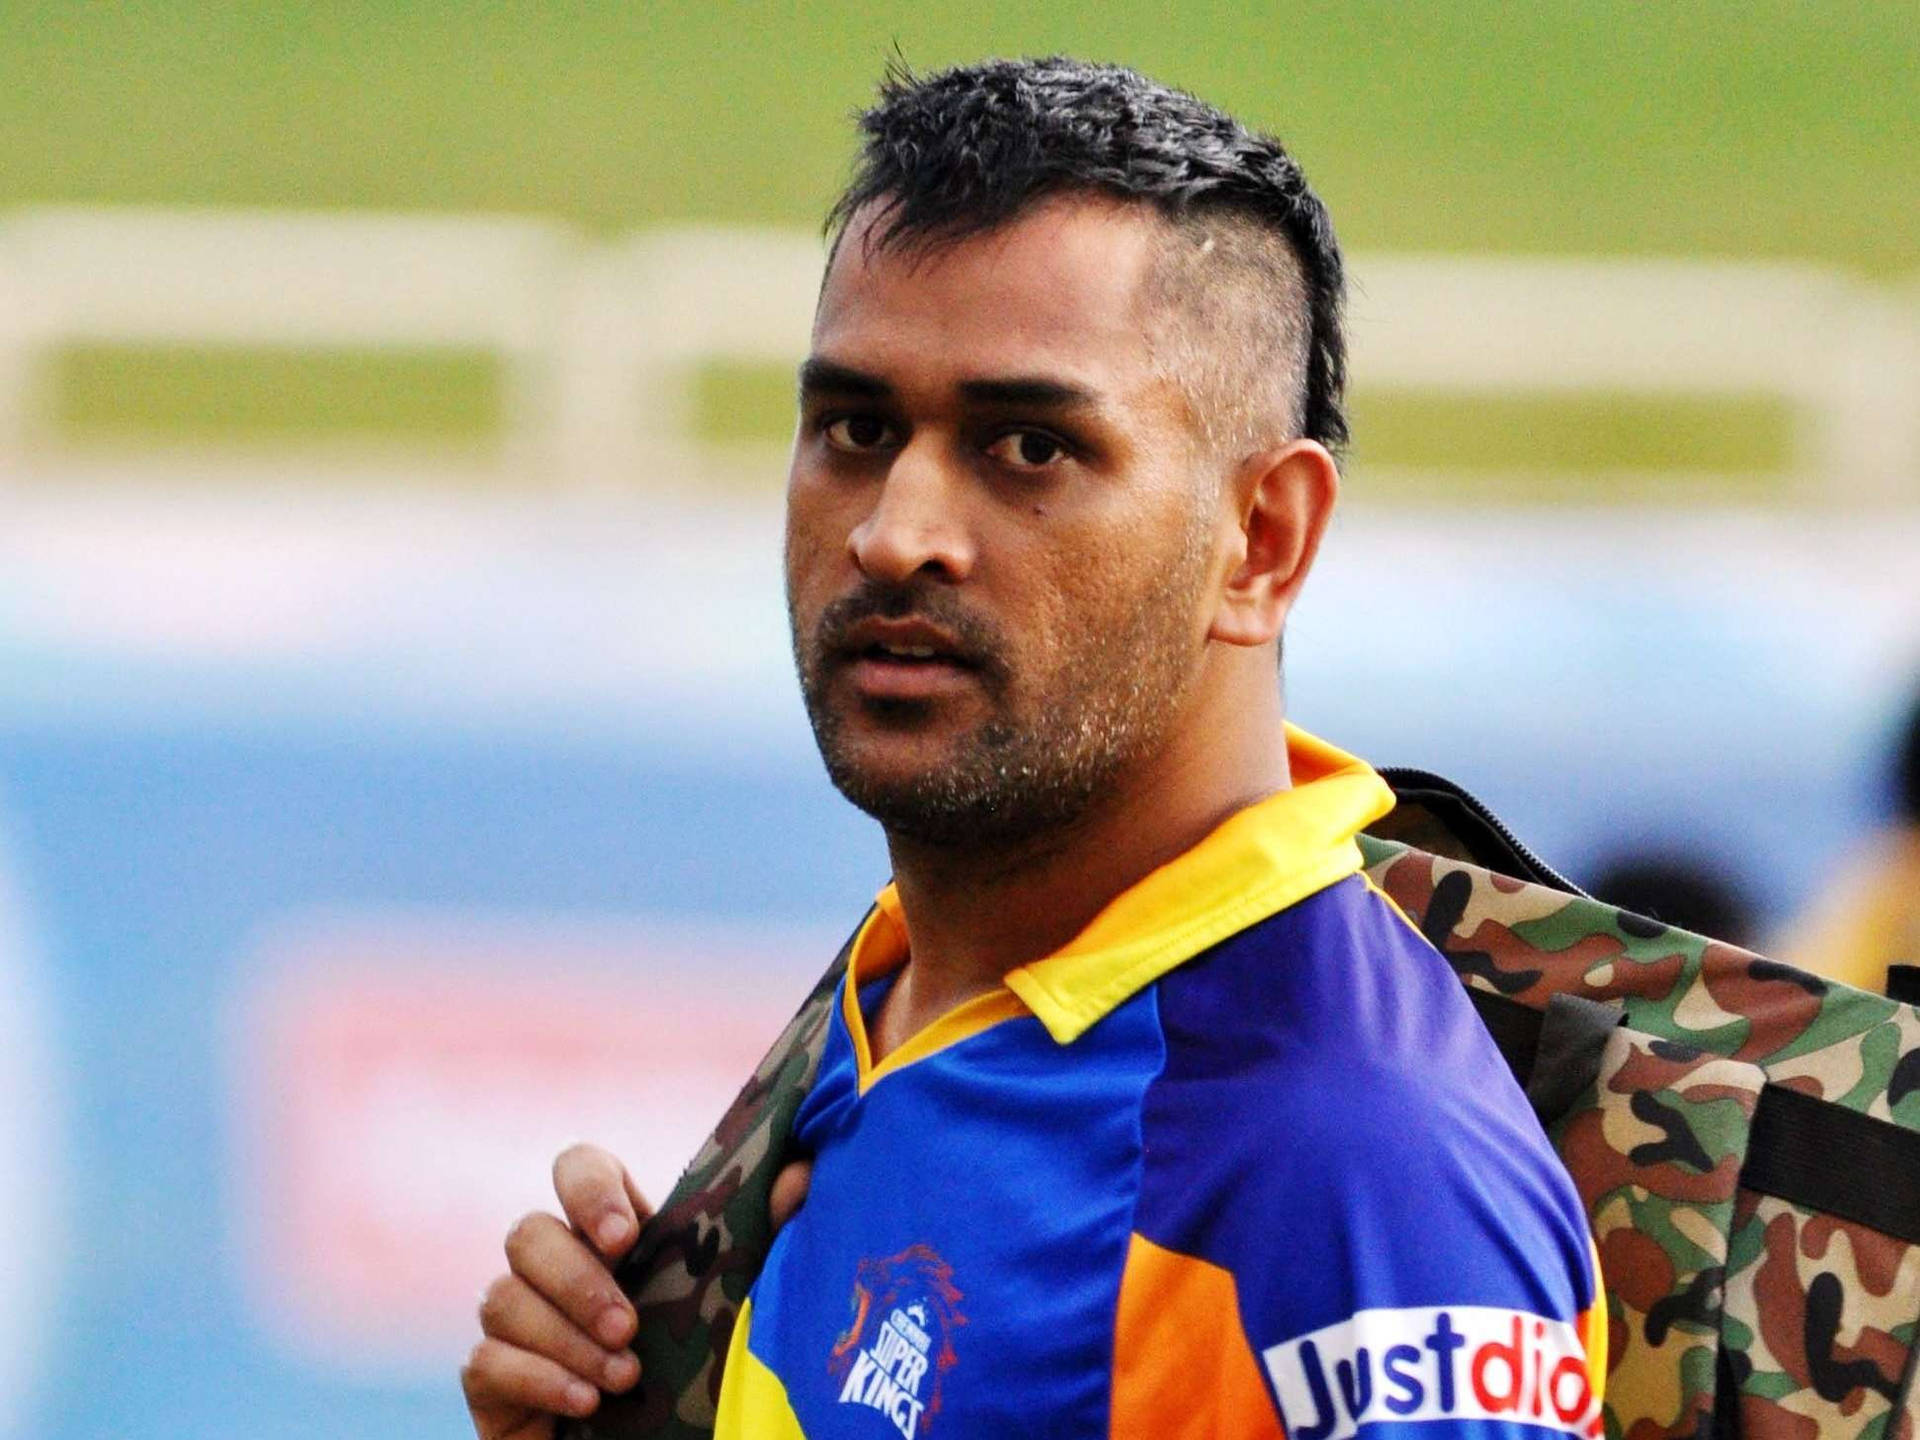 Ms Dhoni Mohawk Hairstyle Background